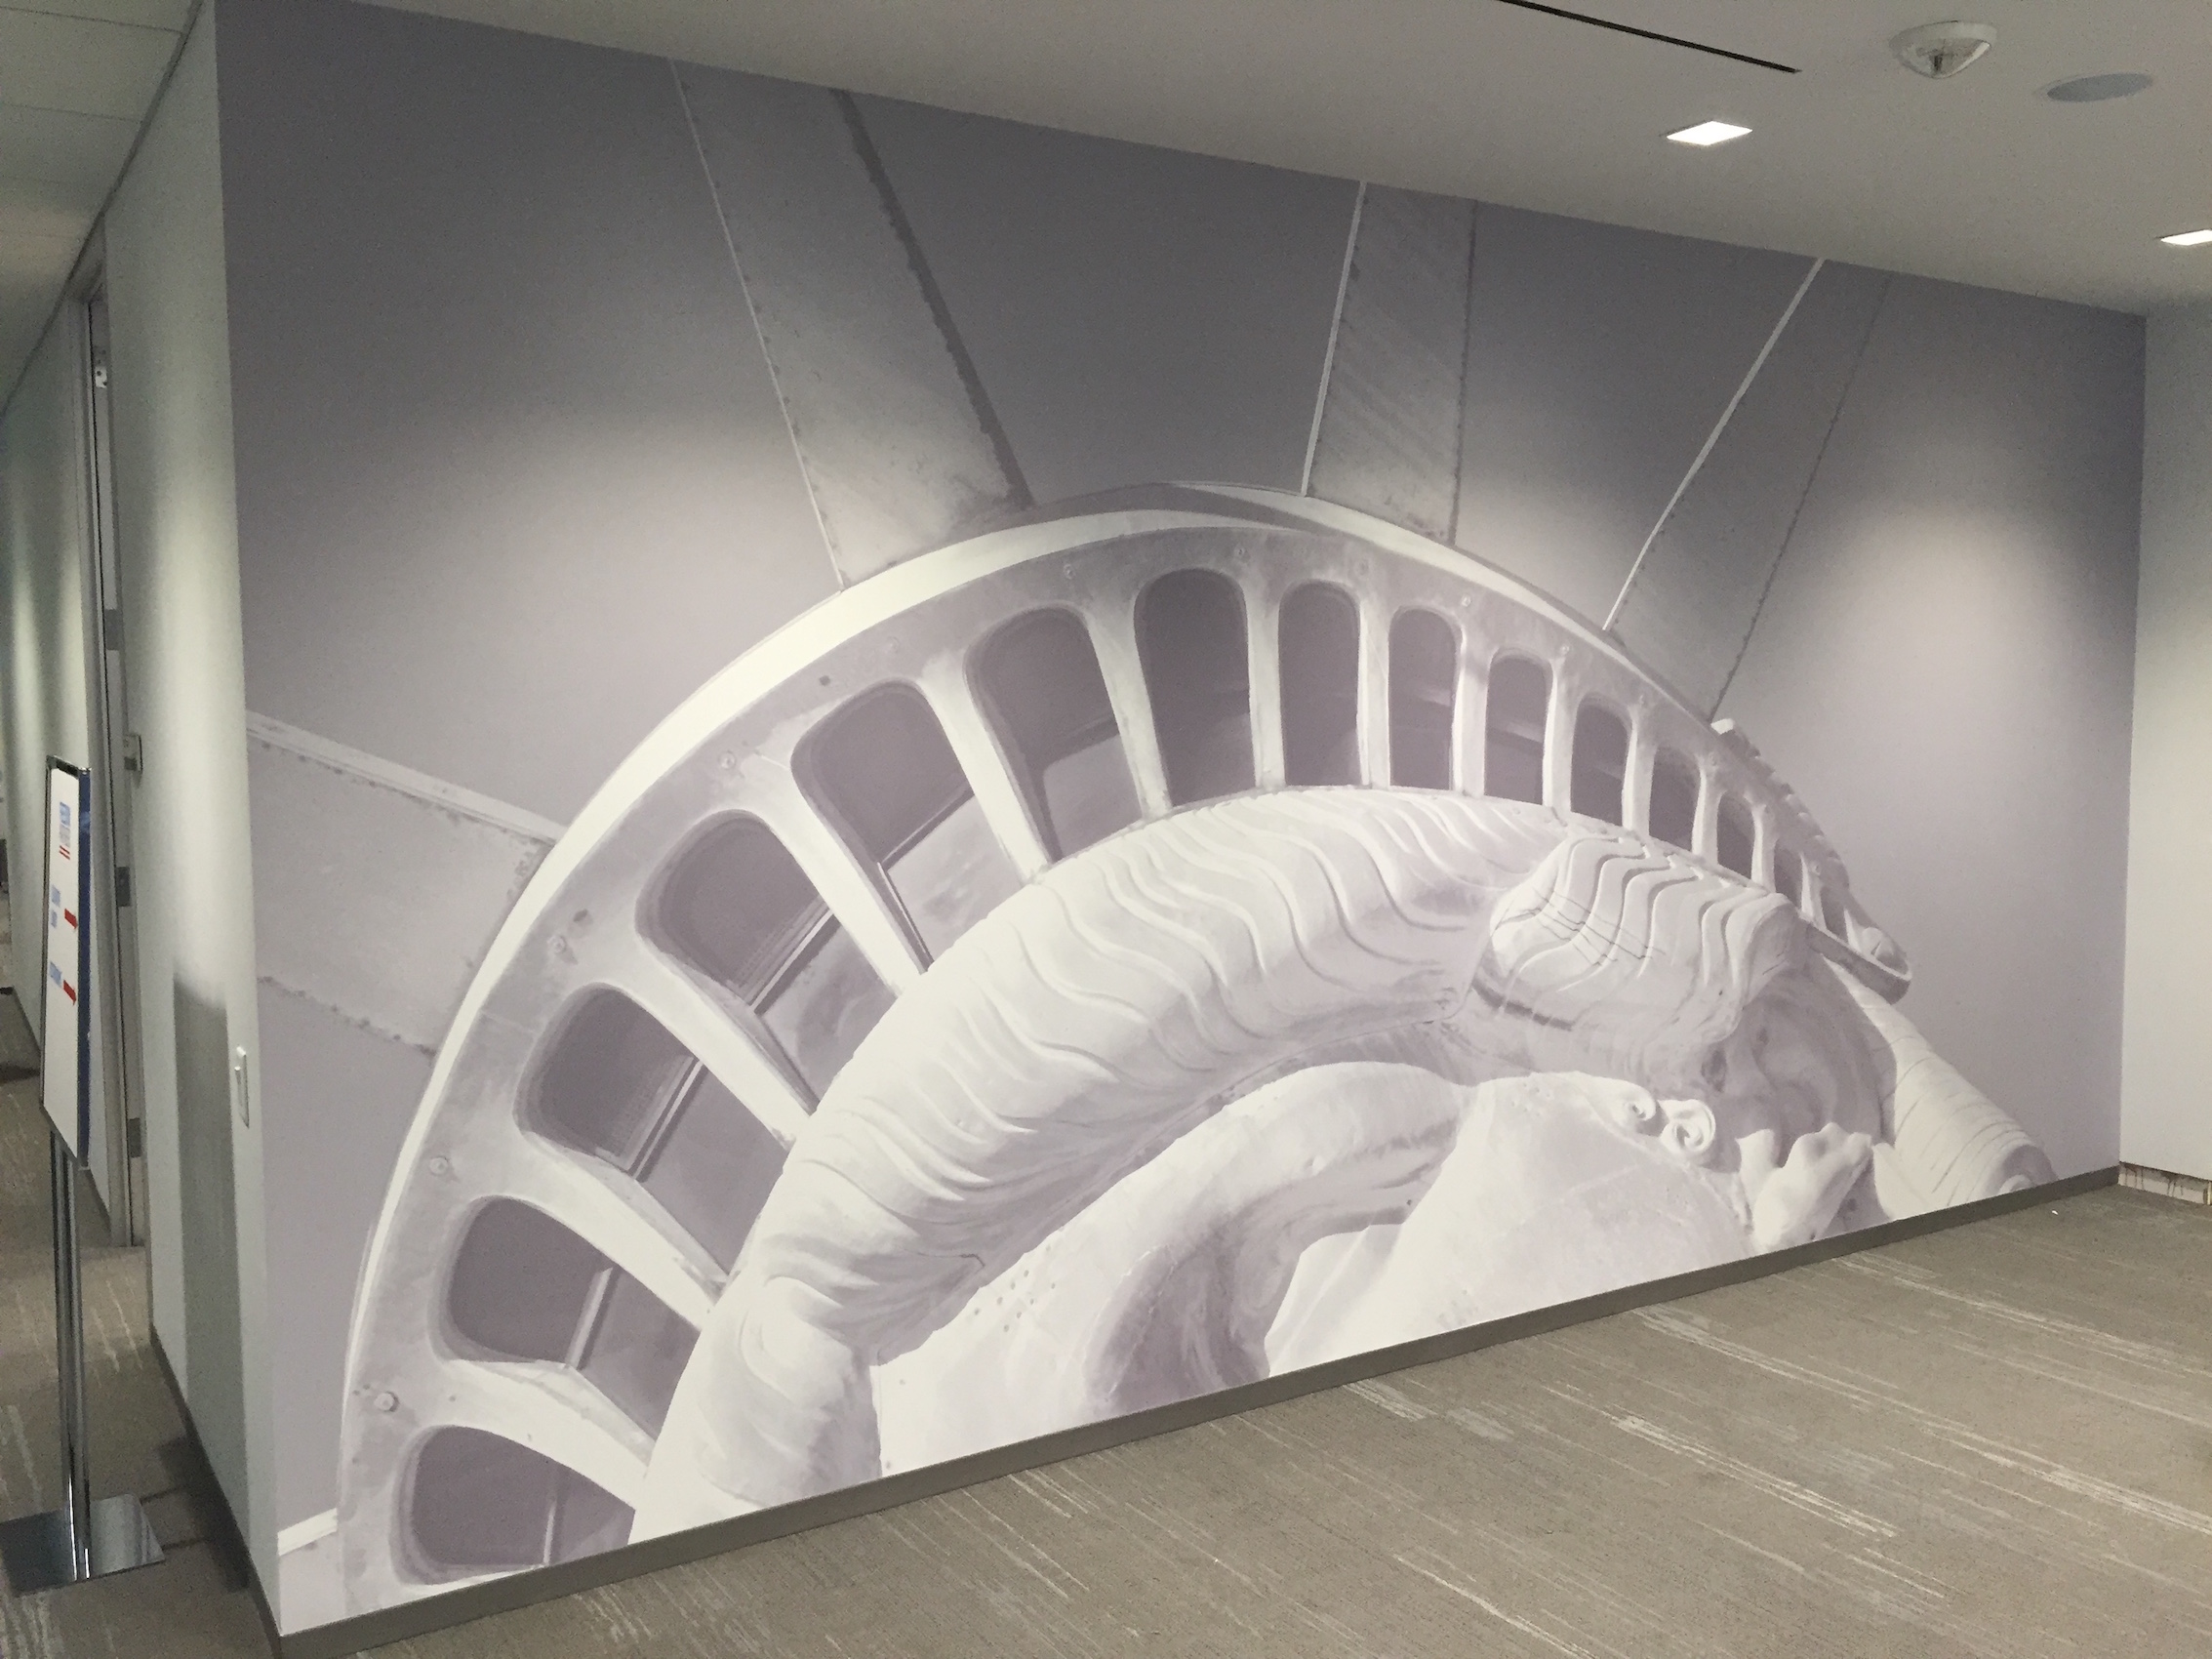 Statue of Liberty wall mural